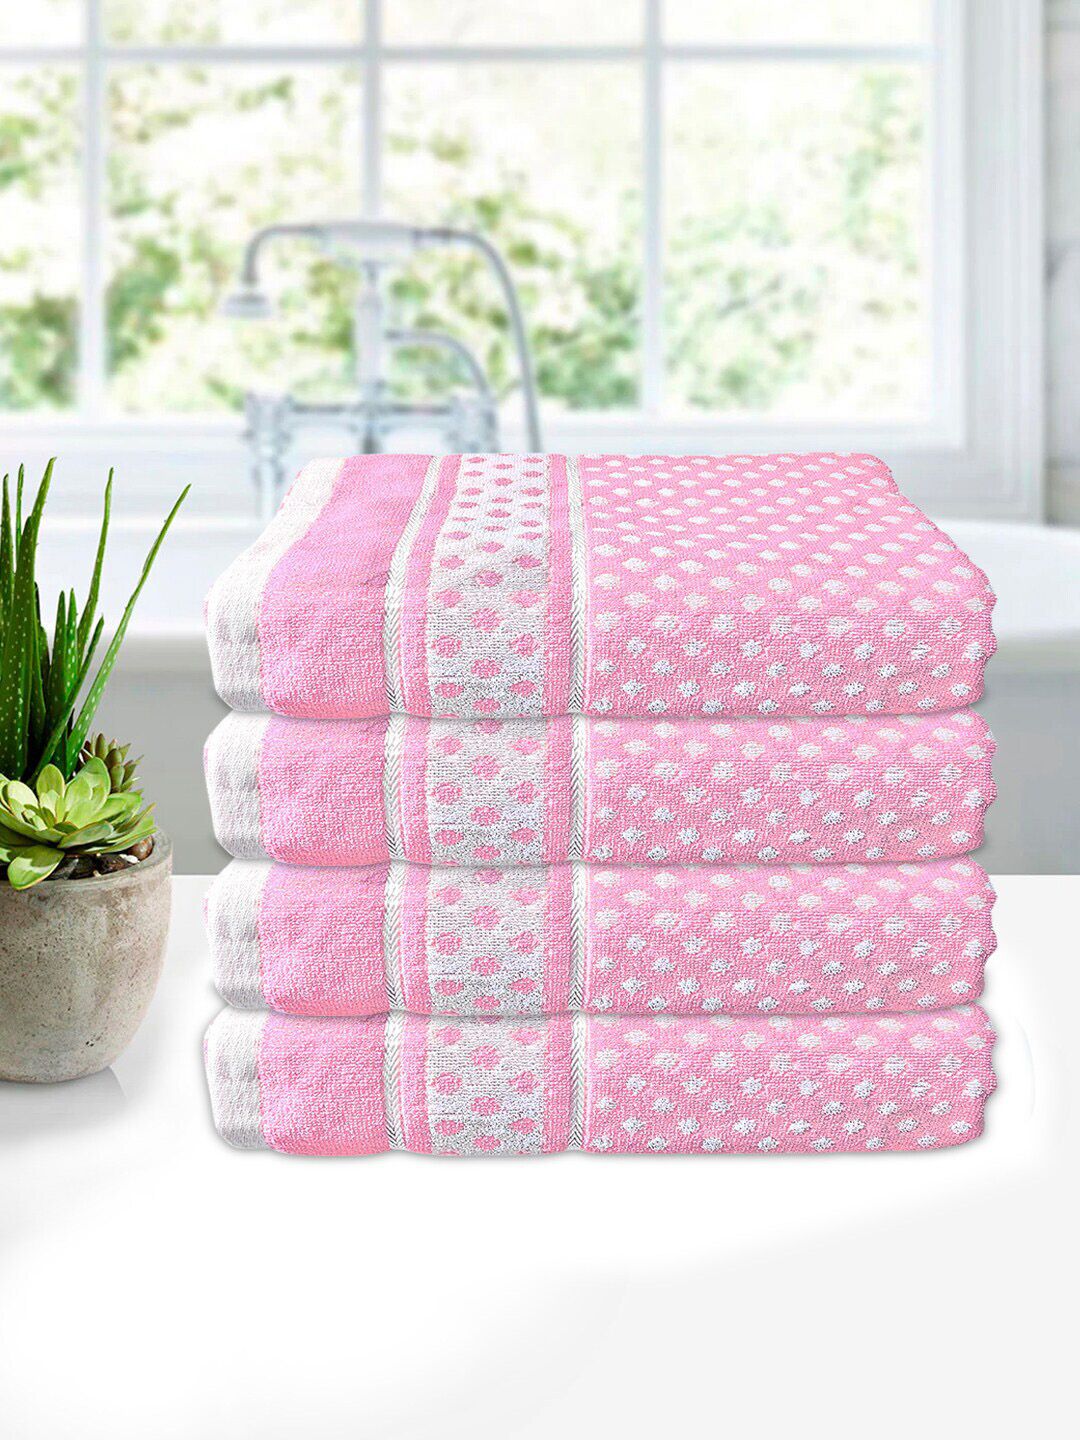 Kuber Industries Unisex Set Of 4 Pink & White Printed 400 GSM Pure Cotton Bath Towels Price in India